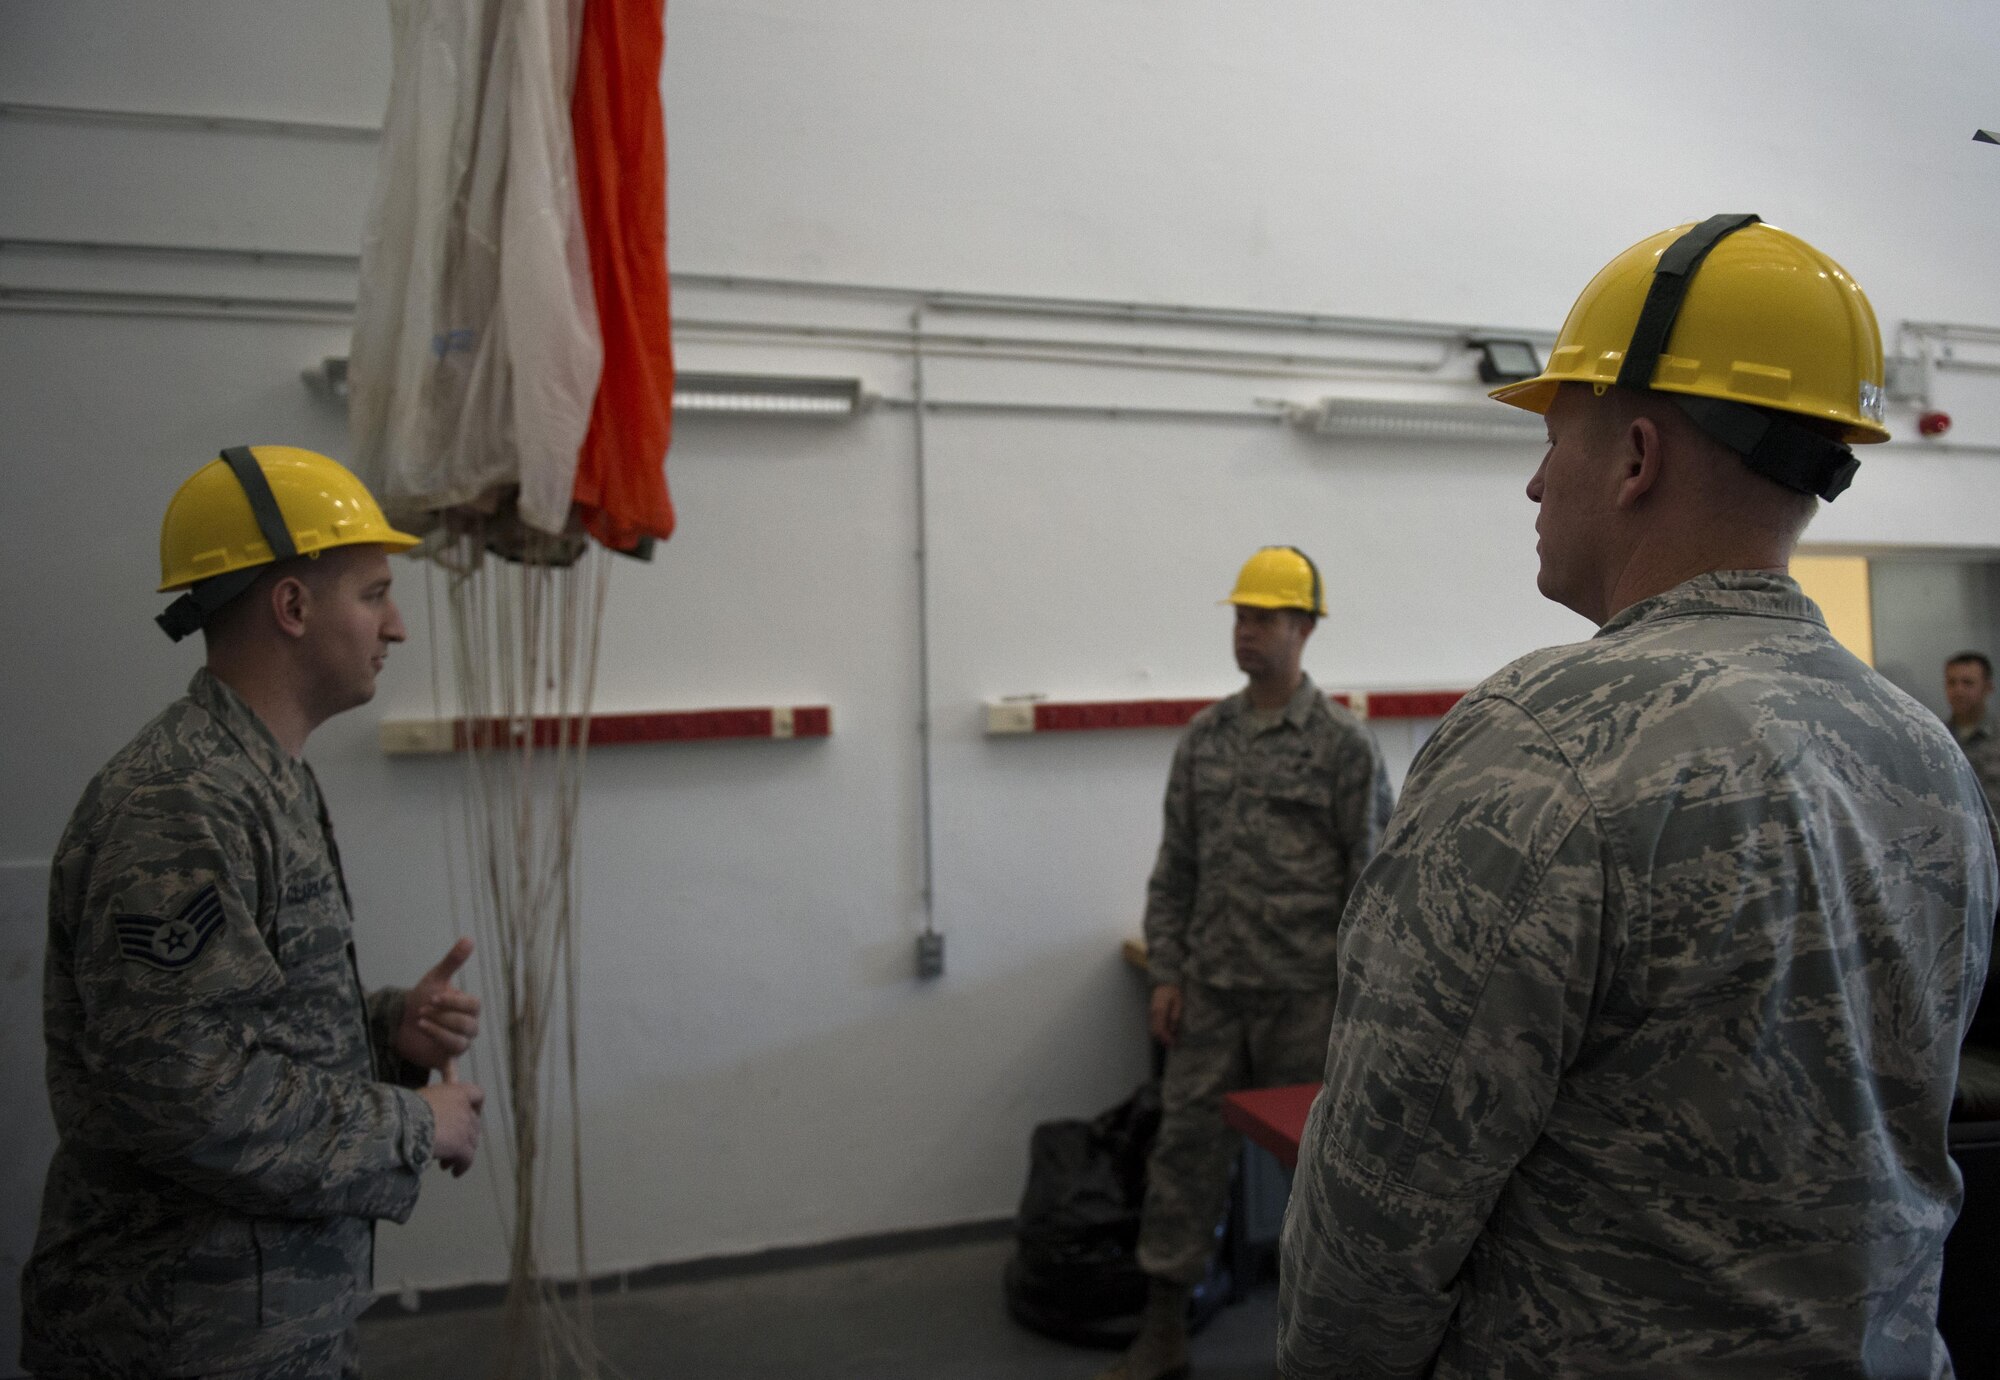 U.S. Air Force Staff Sgt. Joshua Clark-Parrick, 52nd Operations Support Squadron NCO in charge of aircrew flight operations main shop, left, speaks to Col. Joseph McFall, 52nd Fighter Wing commander, right, and Chief Master Sgt. Edwin Ludwigsen, 52nd FW command chief, center, during a Saber leadership “out and about” event at the parachute shop on Spangdahlem Air Base, Germany, Sept. 8, 2016. The event lets the 52nd FW commander and command chief get a hands on experience at Saber work centers in an effort to better understand the duties of Airmen at Spangdahlem. (U.S. Air Force photo by Airman 1st Class Preston Cherry/Released)